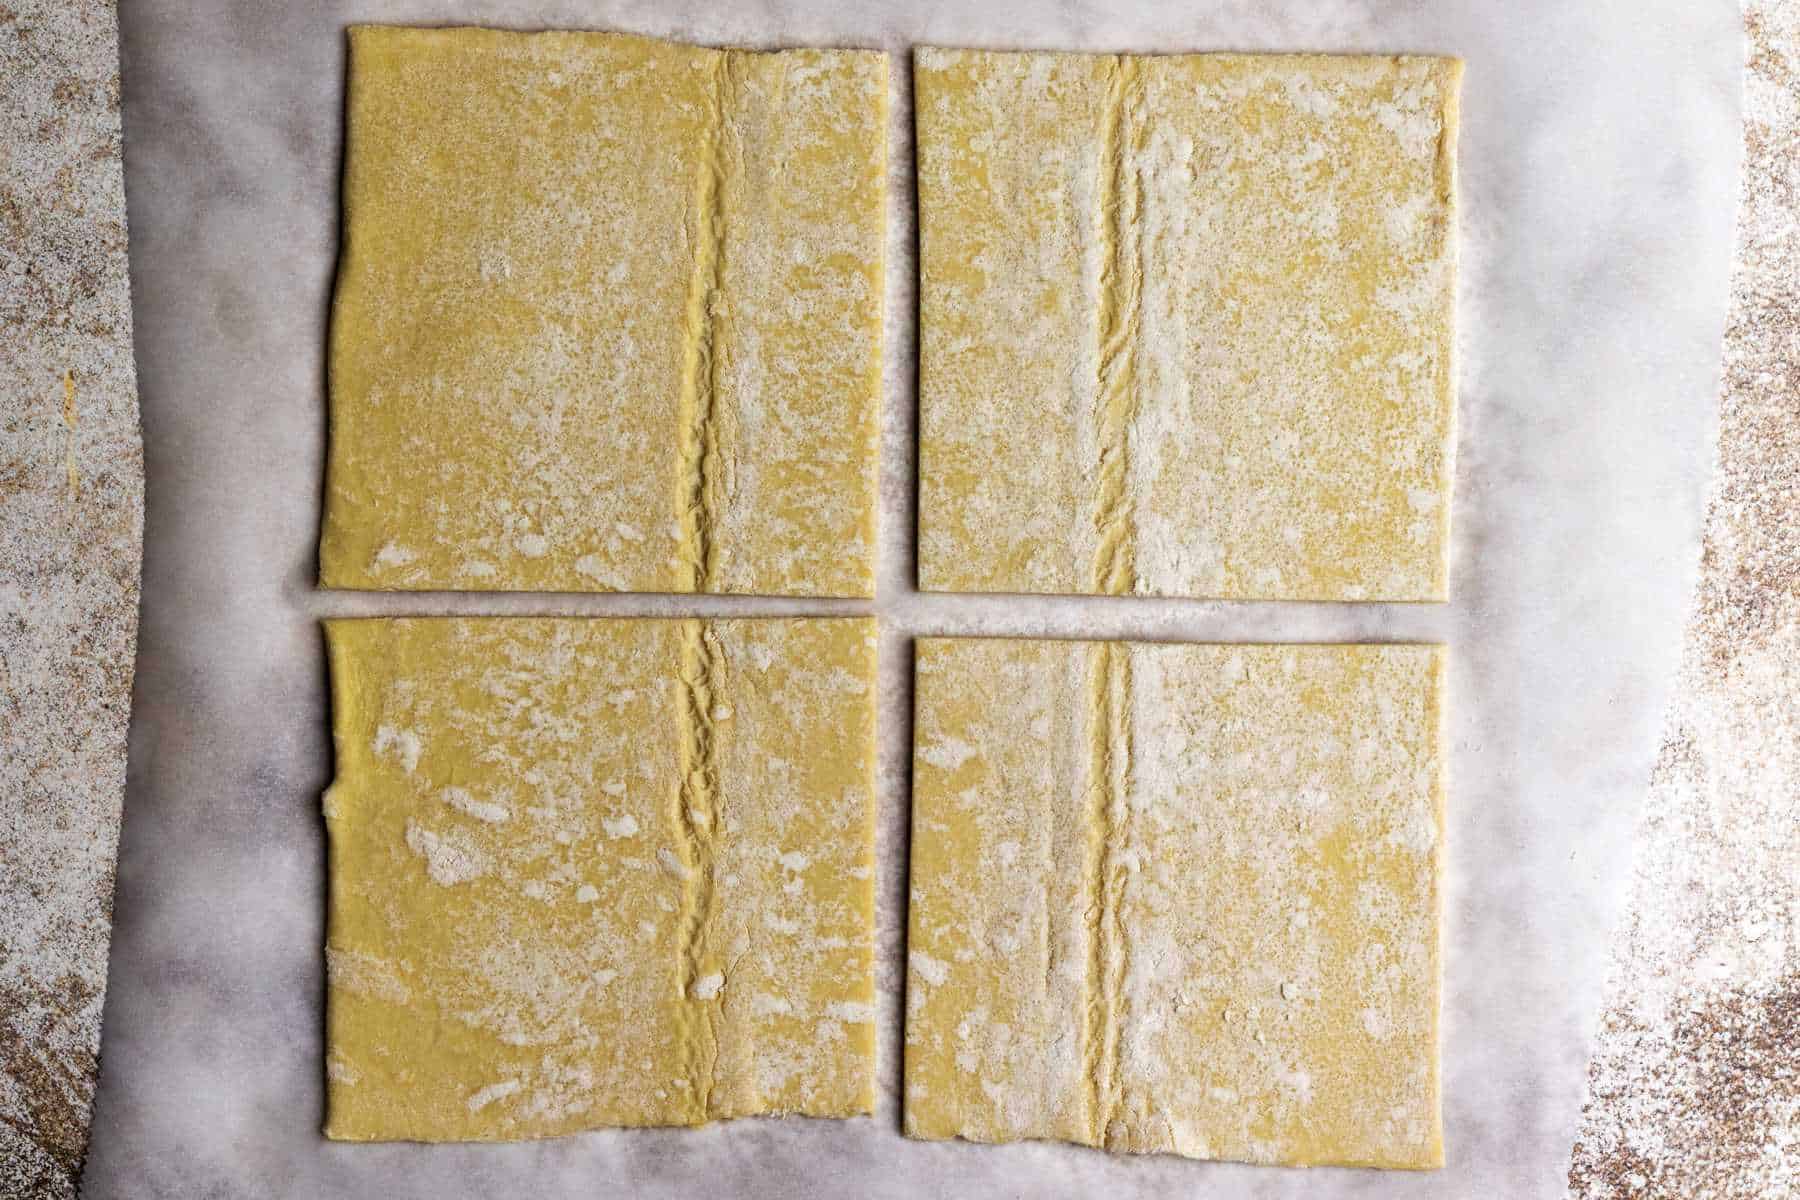 Puff pastry cut into equal squares.